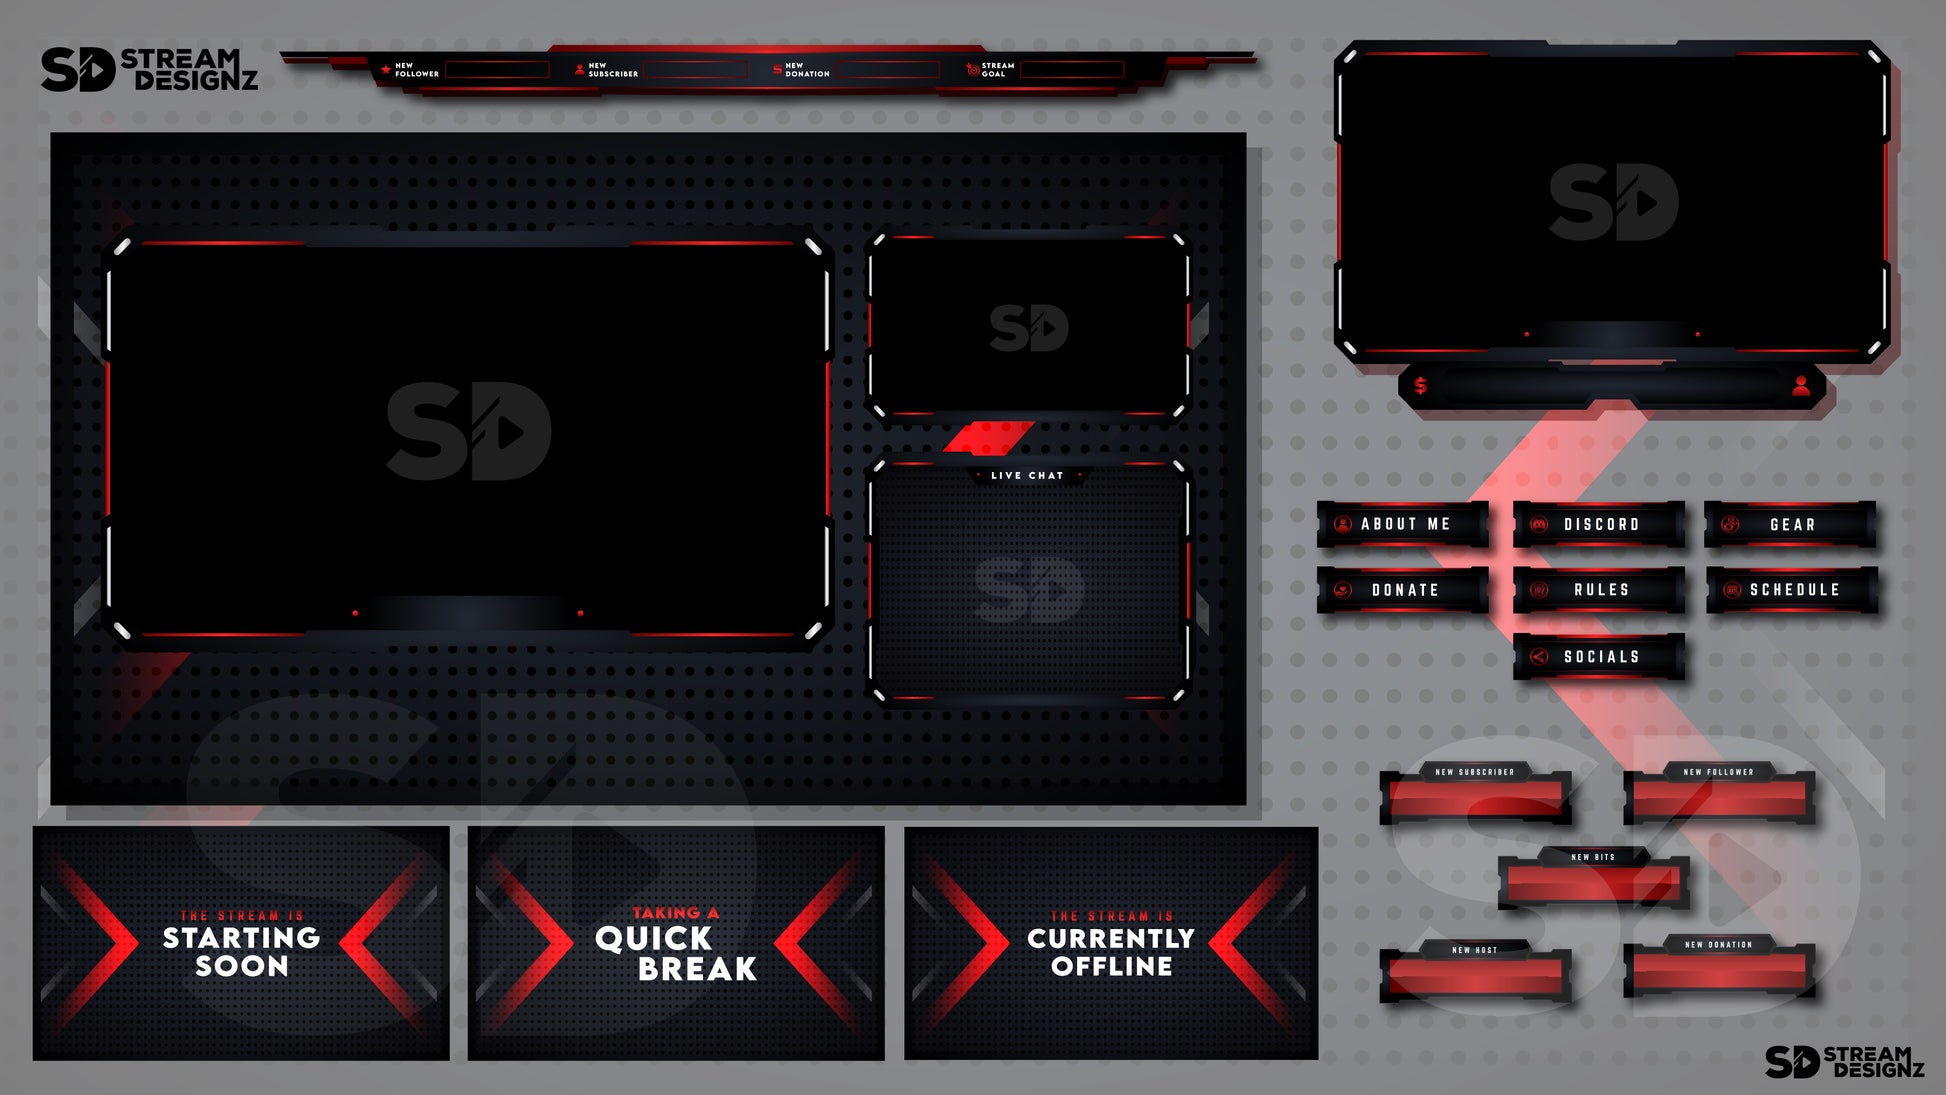 animated stream overlay package project zero feature image stream designz